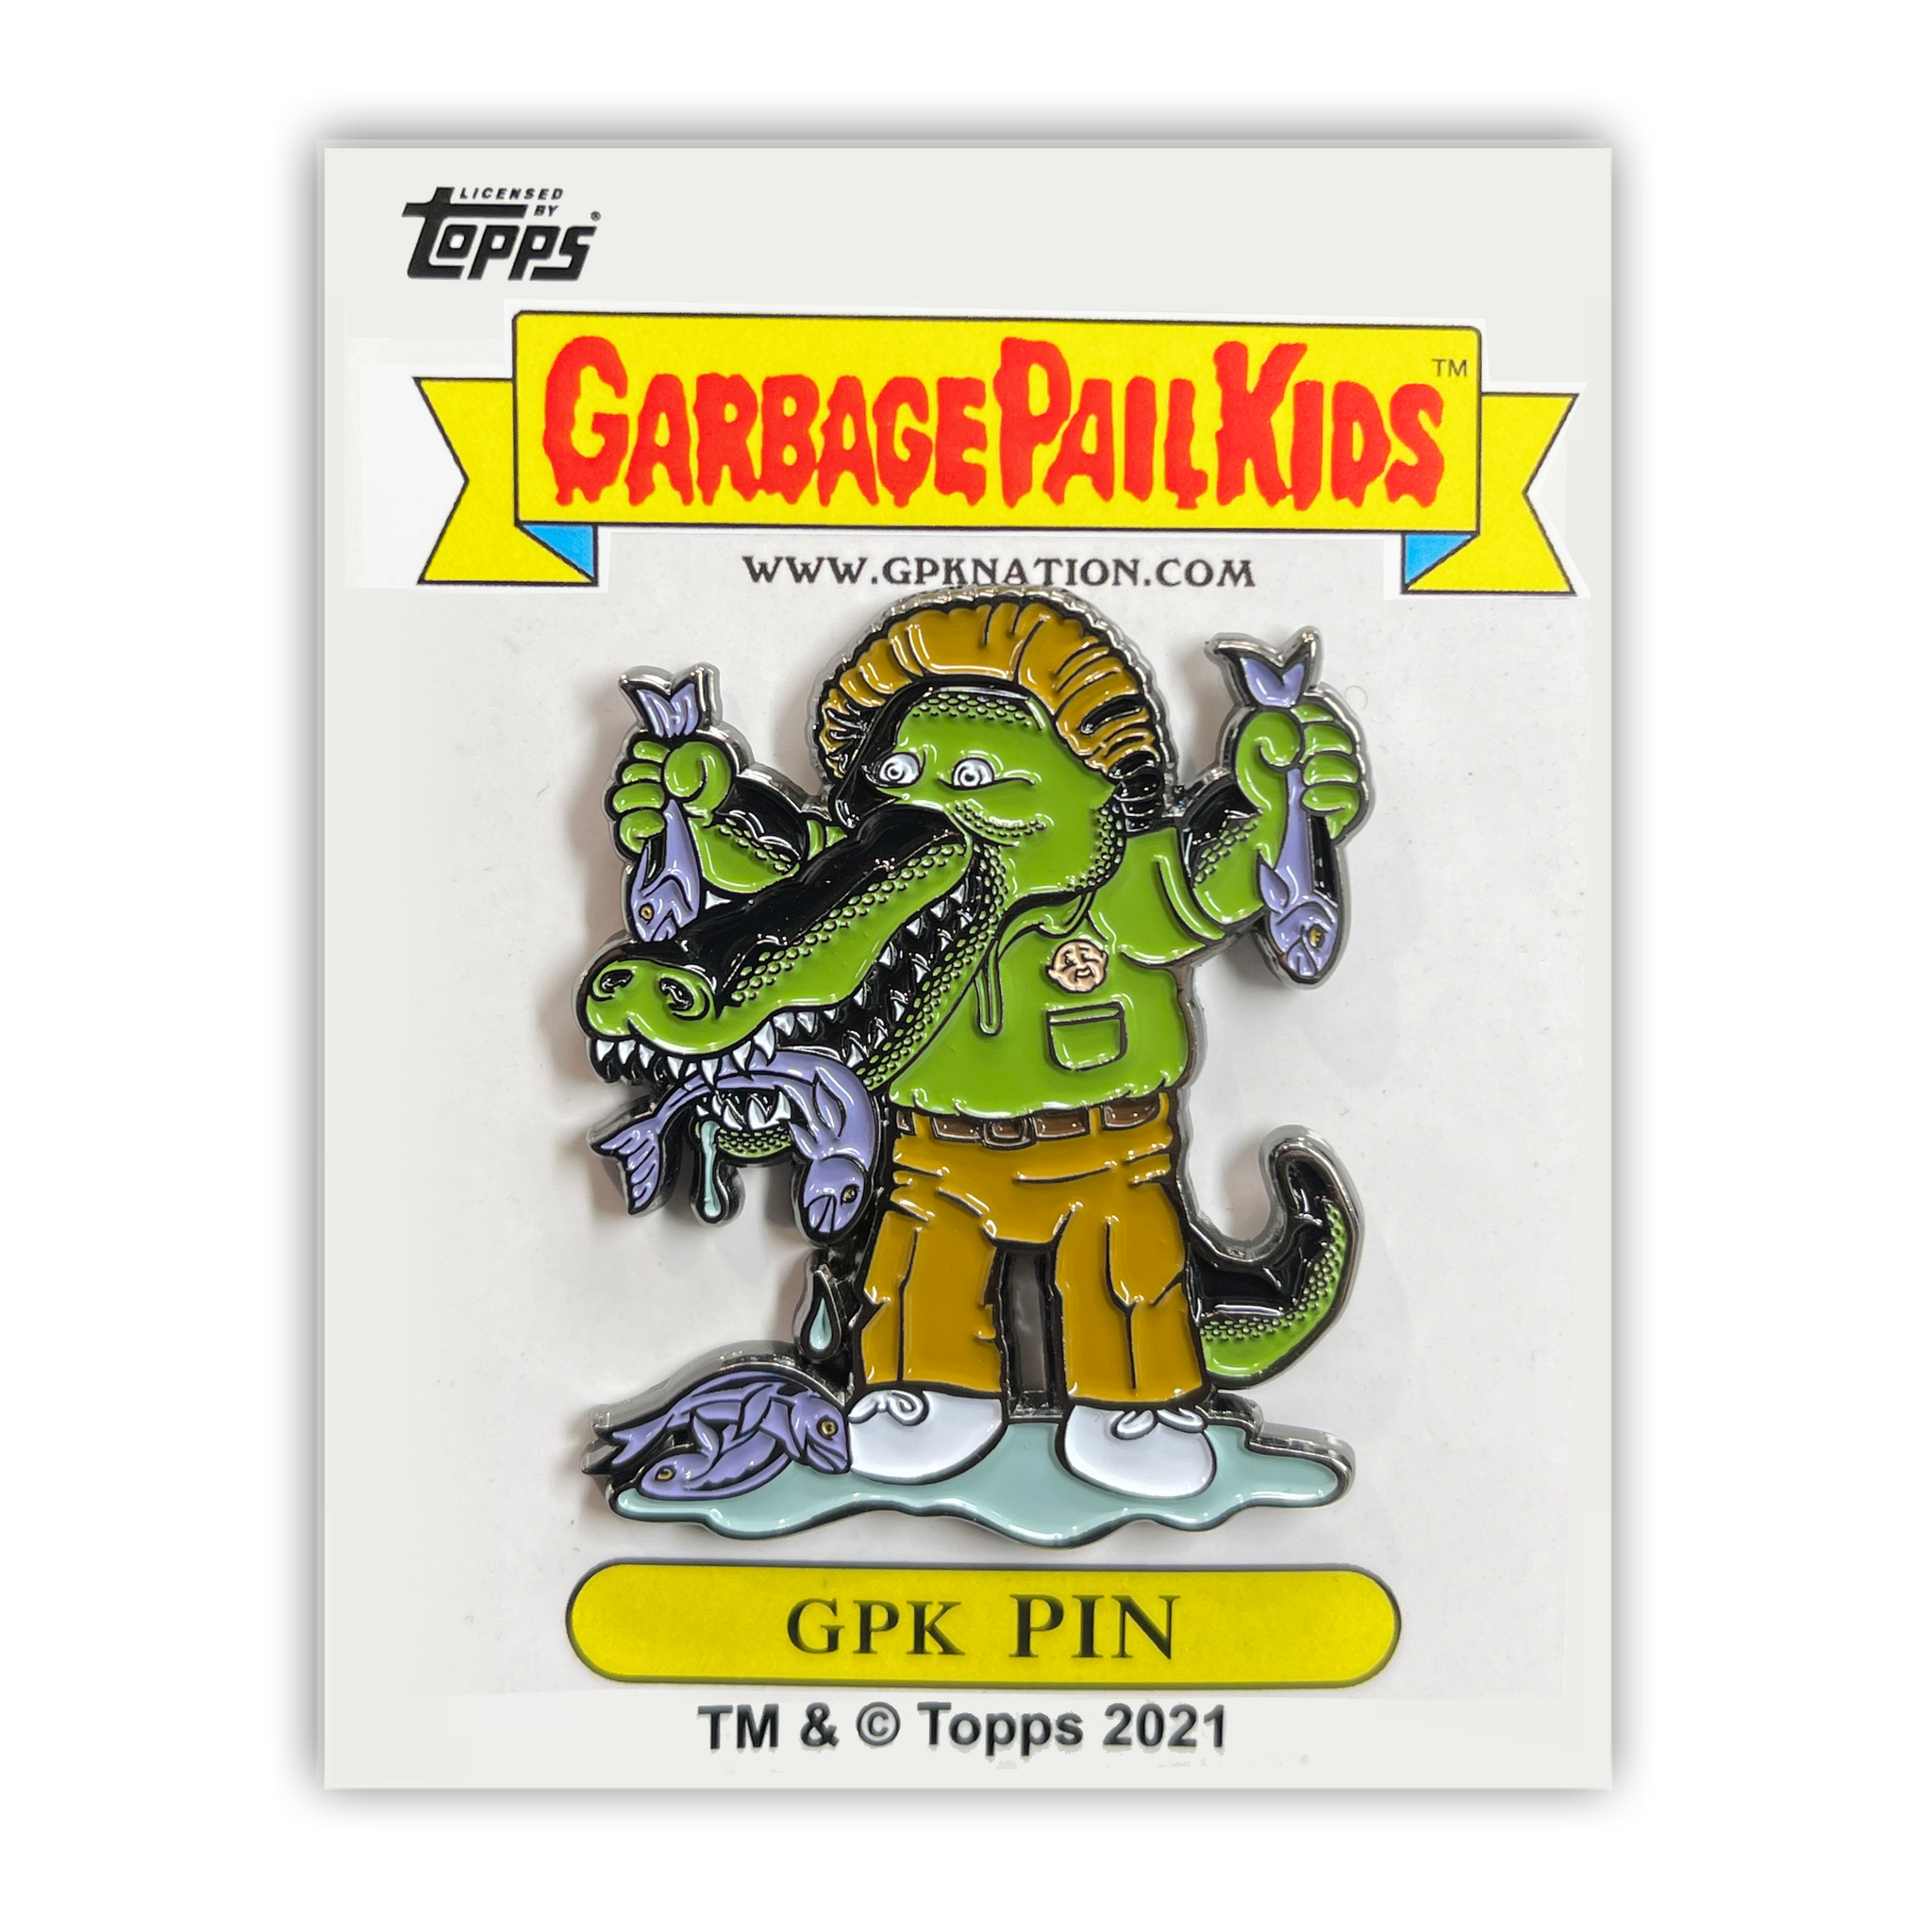 GPK-PP-007 Topps Officially Licensed GPK Ali Gator / Marshy Marshall Garbage Pail Kids Limited Edition pins